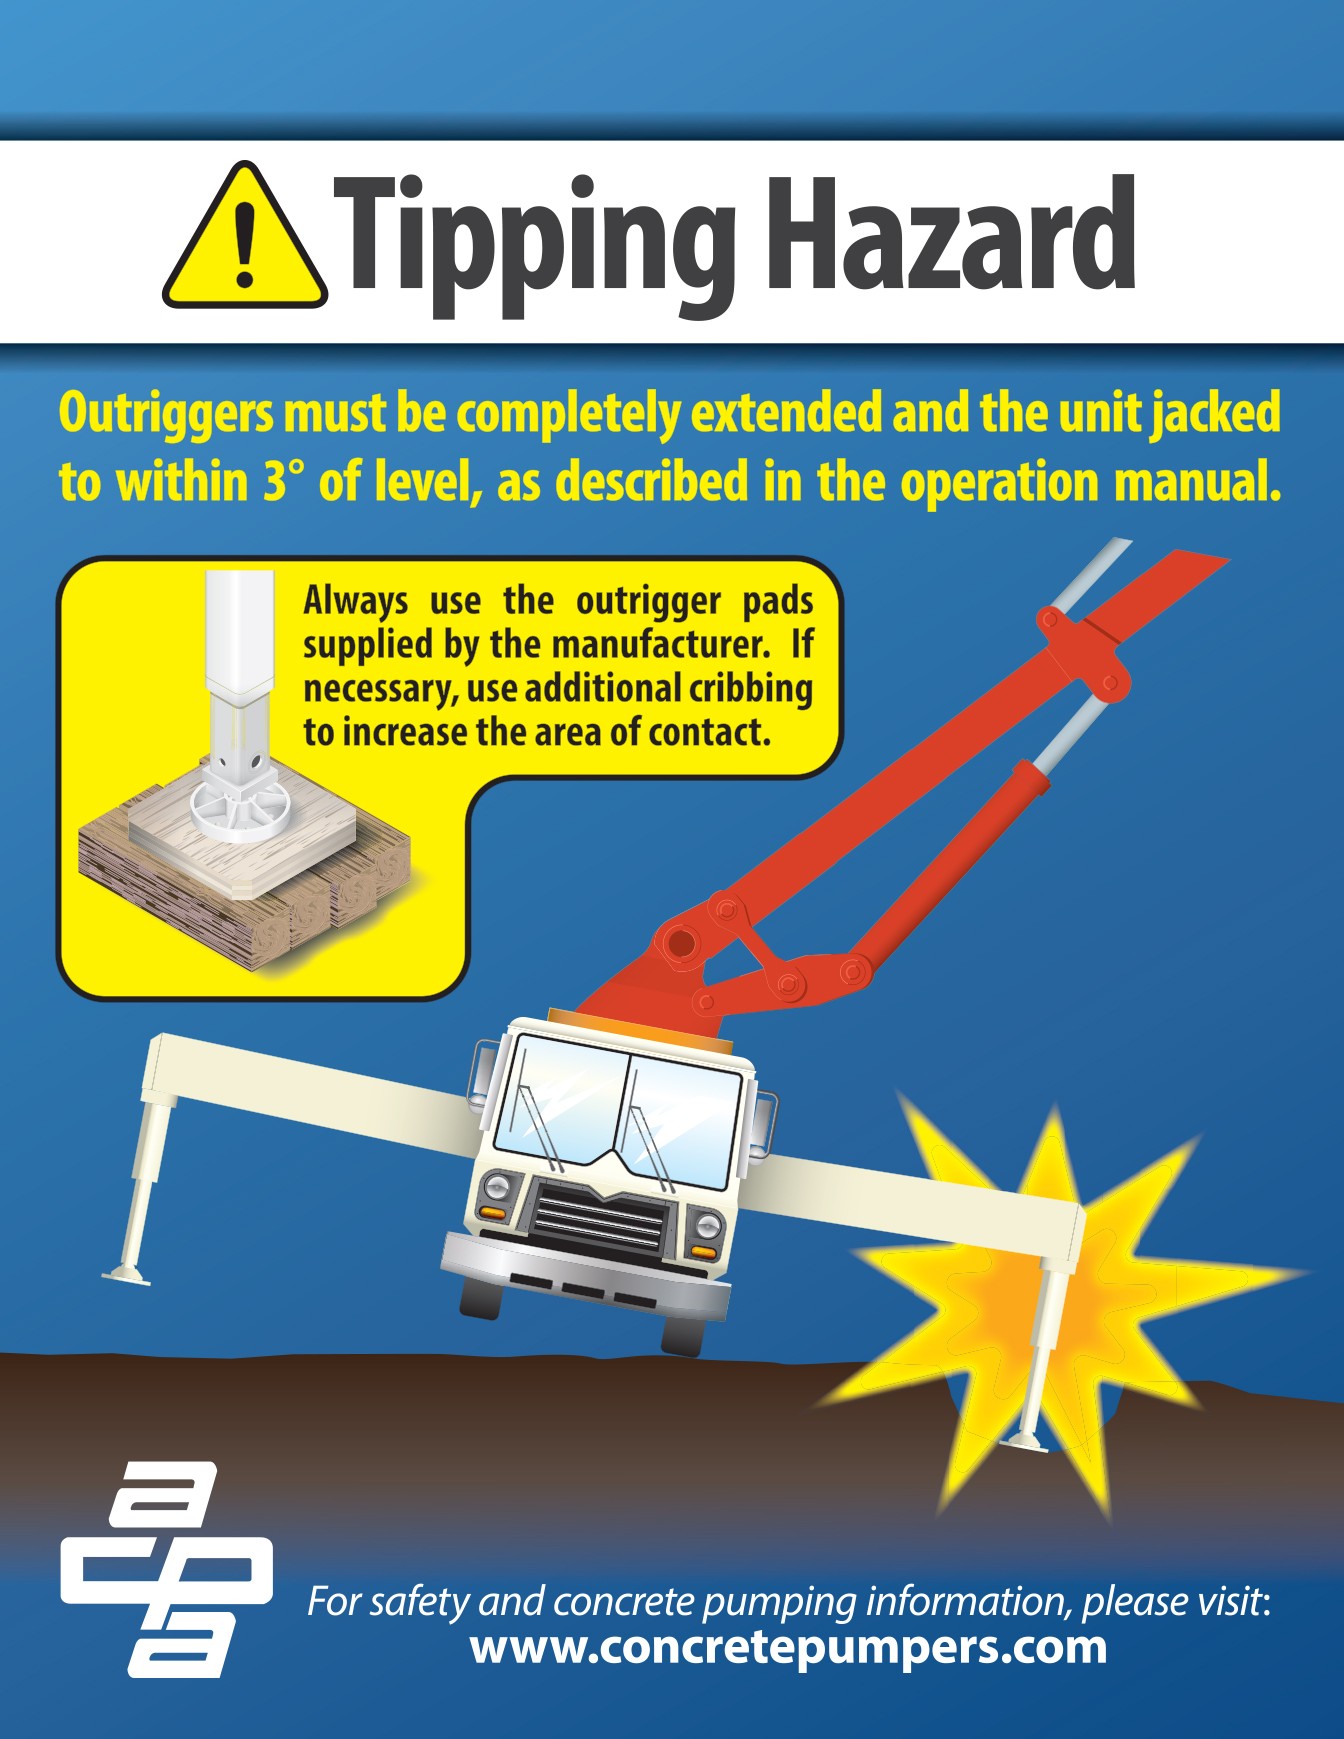 Safety Posters  American Concrete Pumping Association